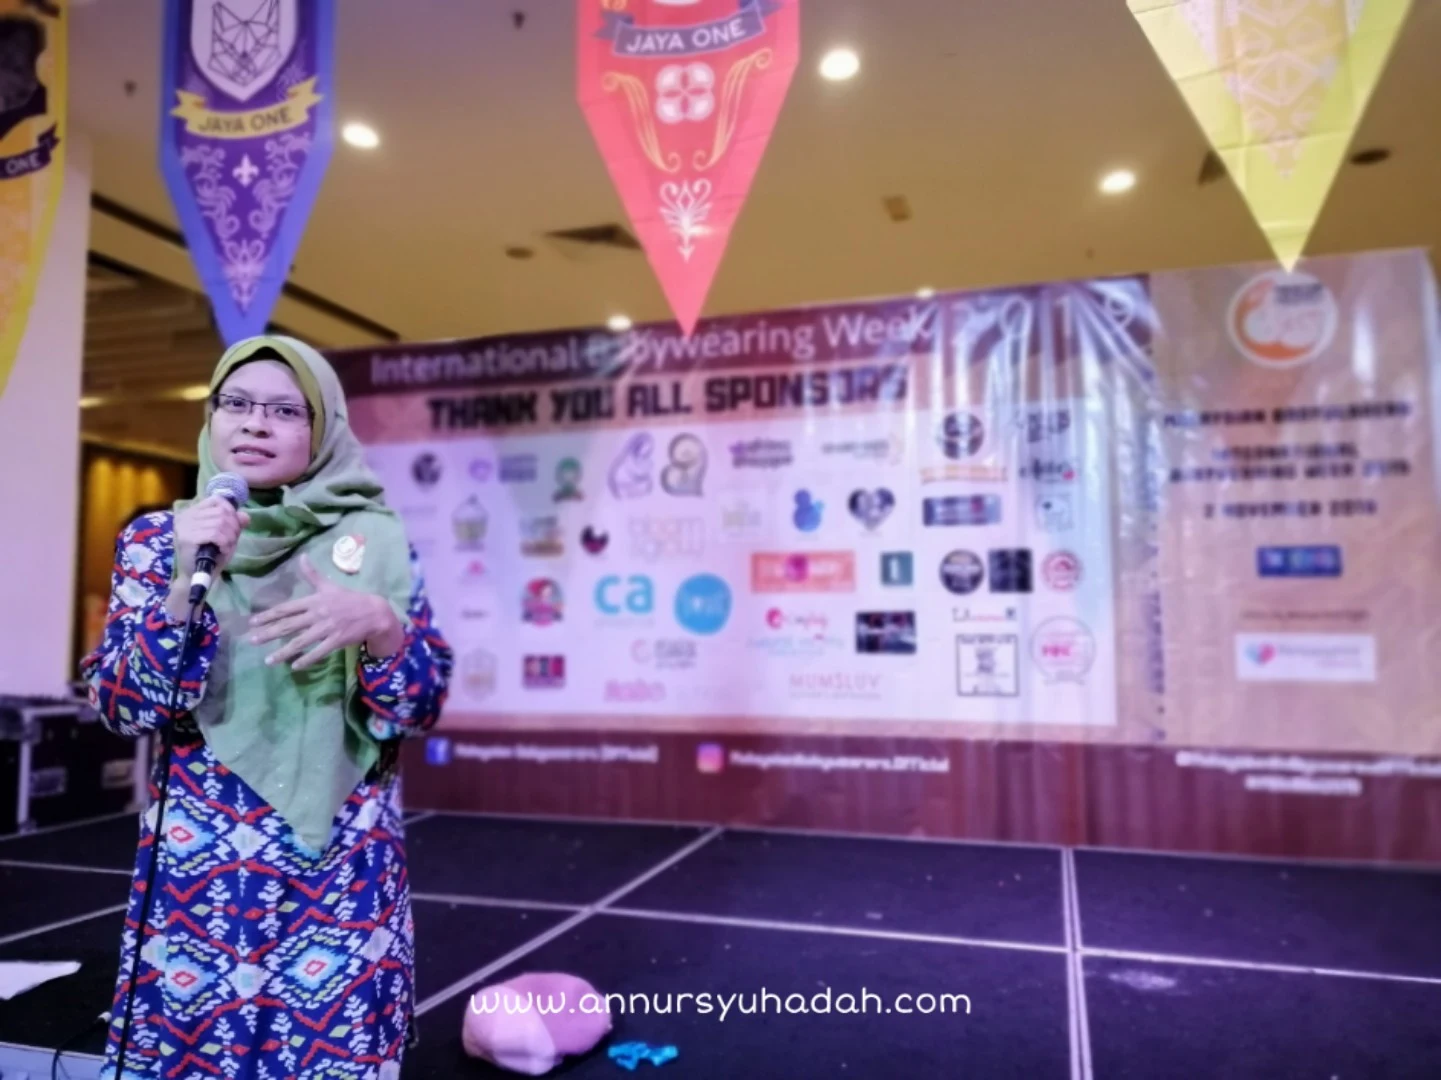 International Babywearing Week (IBW) is a week-long opportunity to celebrate, promote, advocate for, and focus media attention on the many benefits of babywearing, Babywearing Week 2019 di The School by Jaya One, Malaysian Babywearers (Persatuan Penggendong Bayi Malaysia)